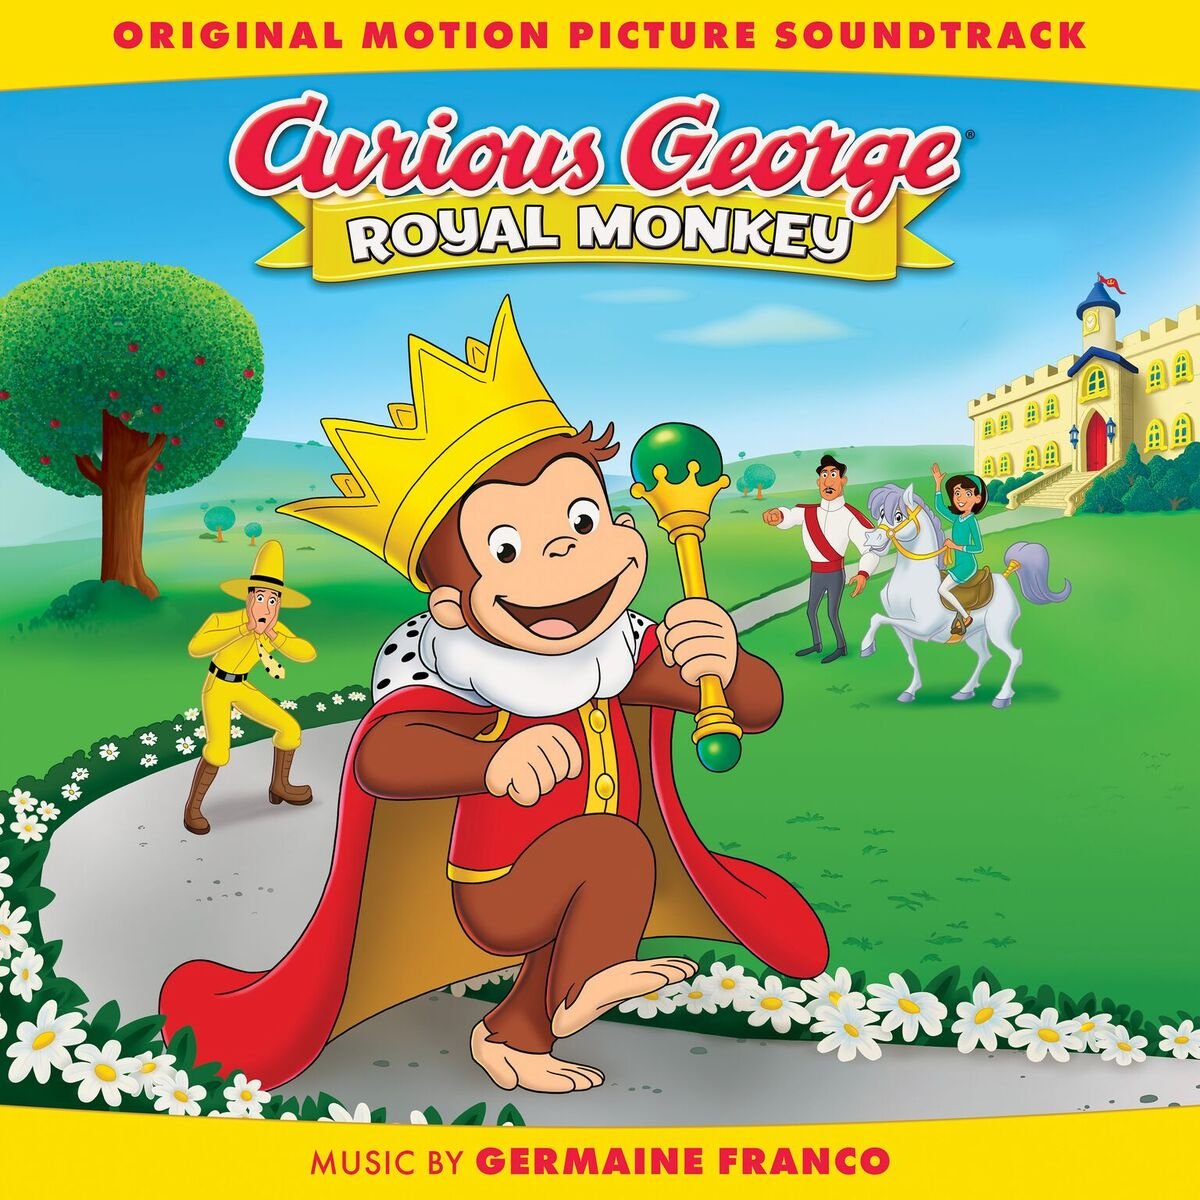 Soundtrack album announced for 'Curious George: Royal Monkey' feat. score by @germaine_franco & original songs by @andygrammer, @MicheleBrourman & @AmandaMcBroom1. bit.ly/2lYSLx1